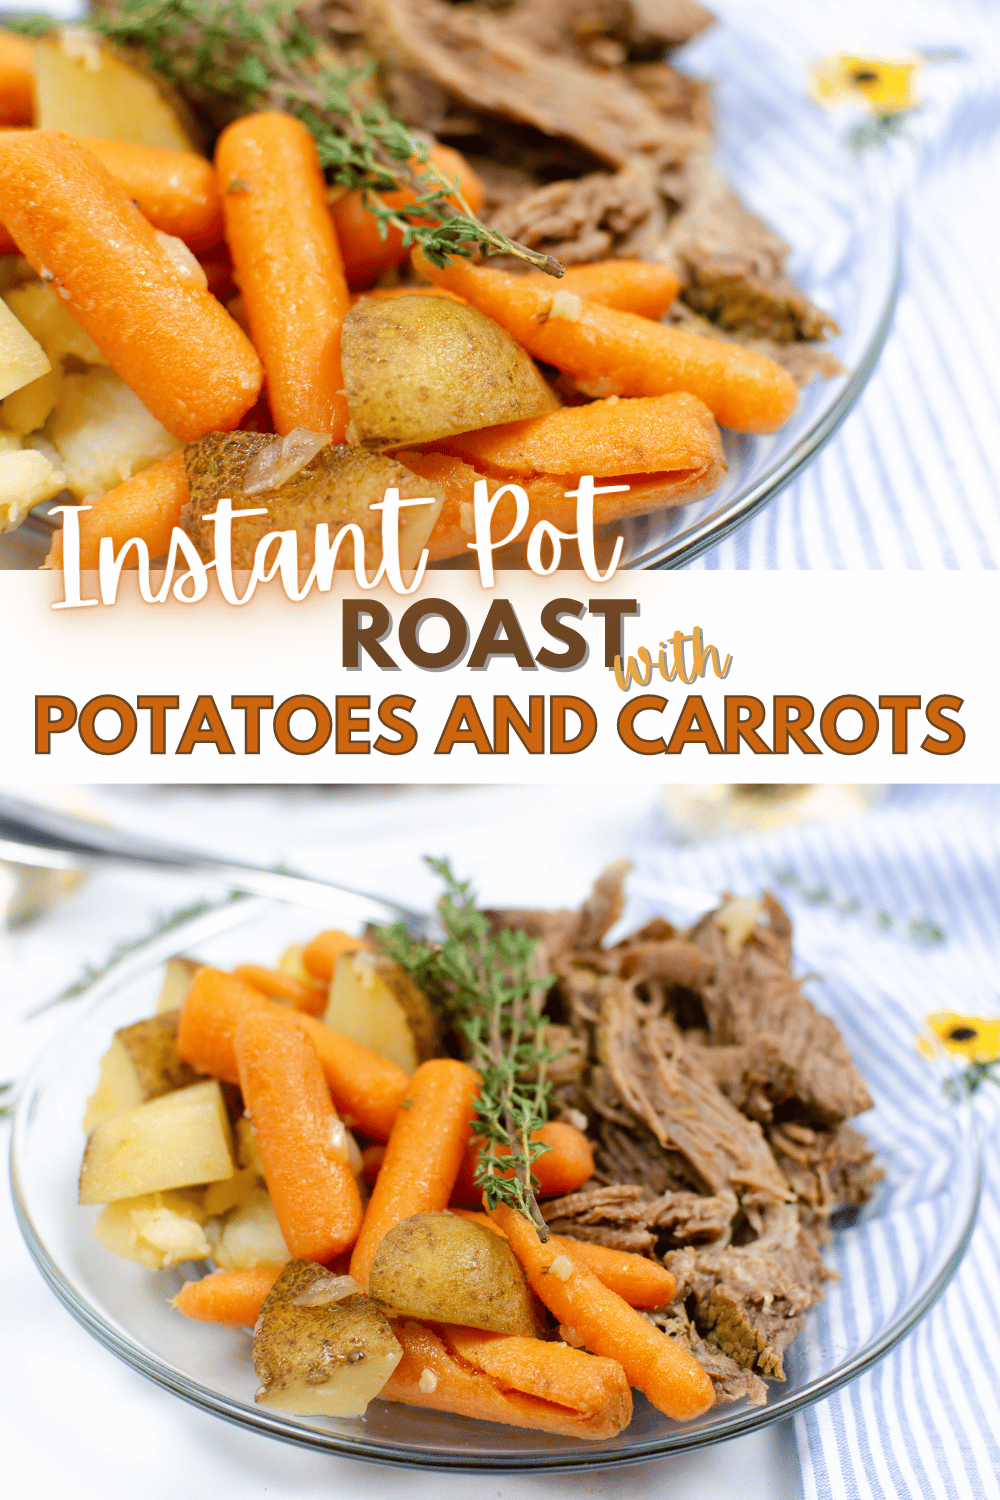 This Instant Pot Roast with Potatoes and Carrots is an easy and delicious way to get a healthy dinner on the table with minimal effort. #instantpot #instantpotroast #roastwithpotatoesandcarrots via @wondermomwannab